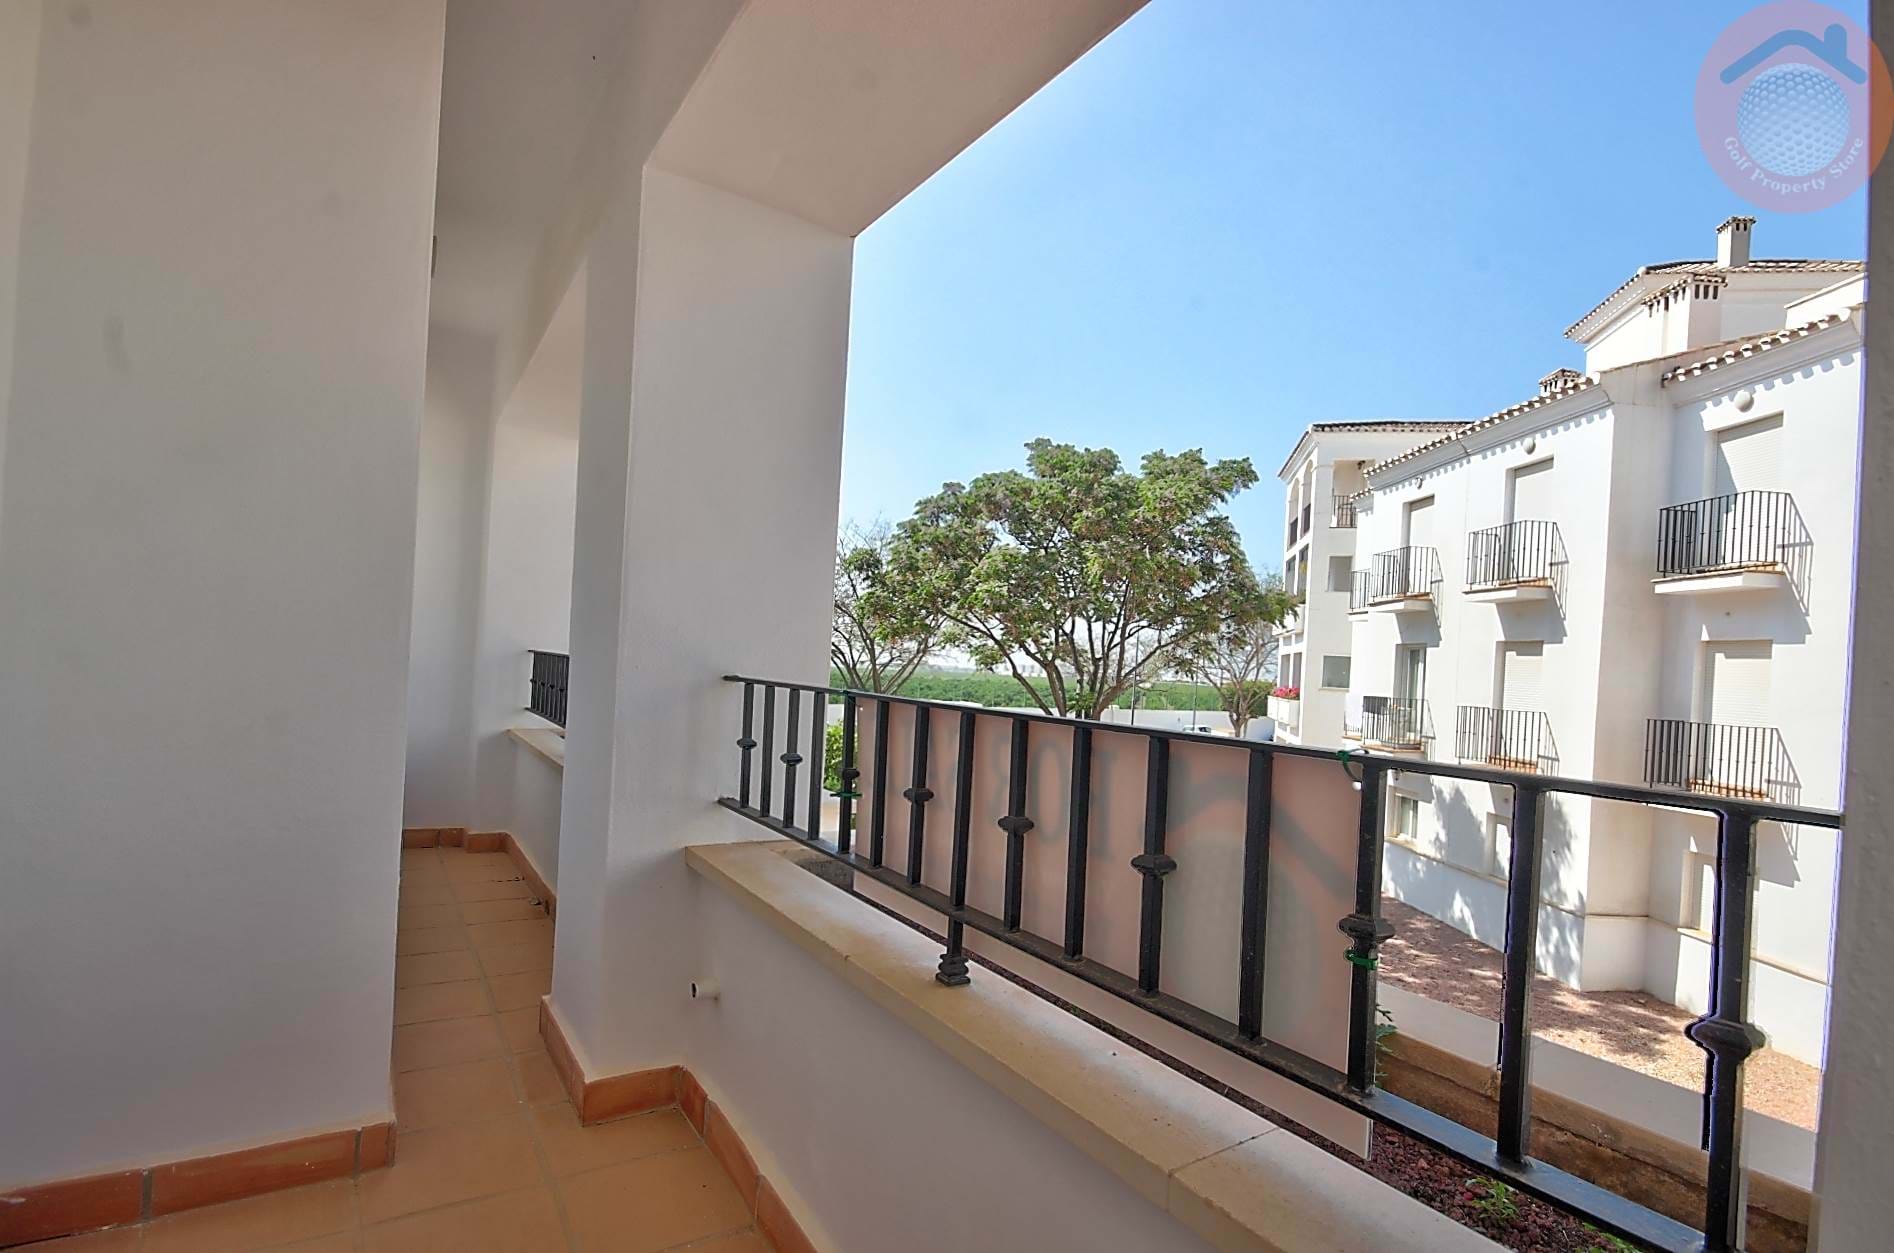 LA TORRE GOLF RESORT 2 BED CURVED WALL APARTMENT WITH GOLF VIEWS